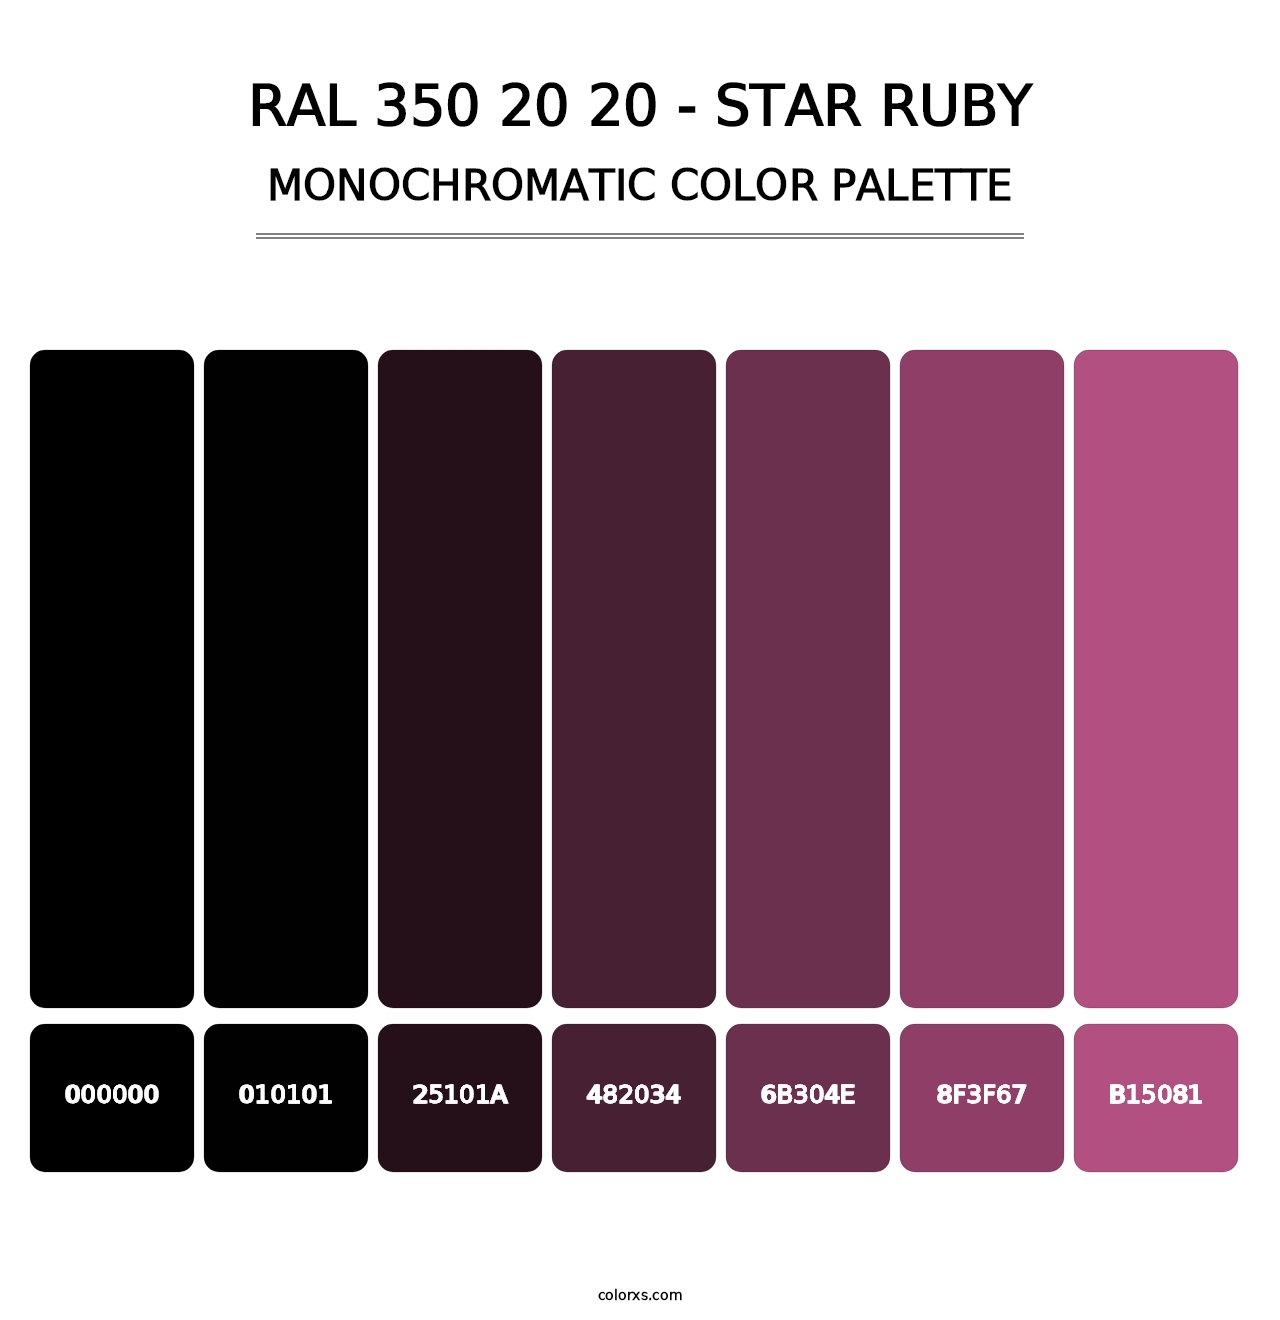 RAL 350 20 20 - Star Ruby - Monochromatic Color Palette